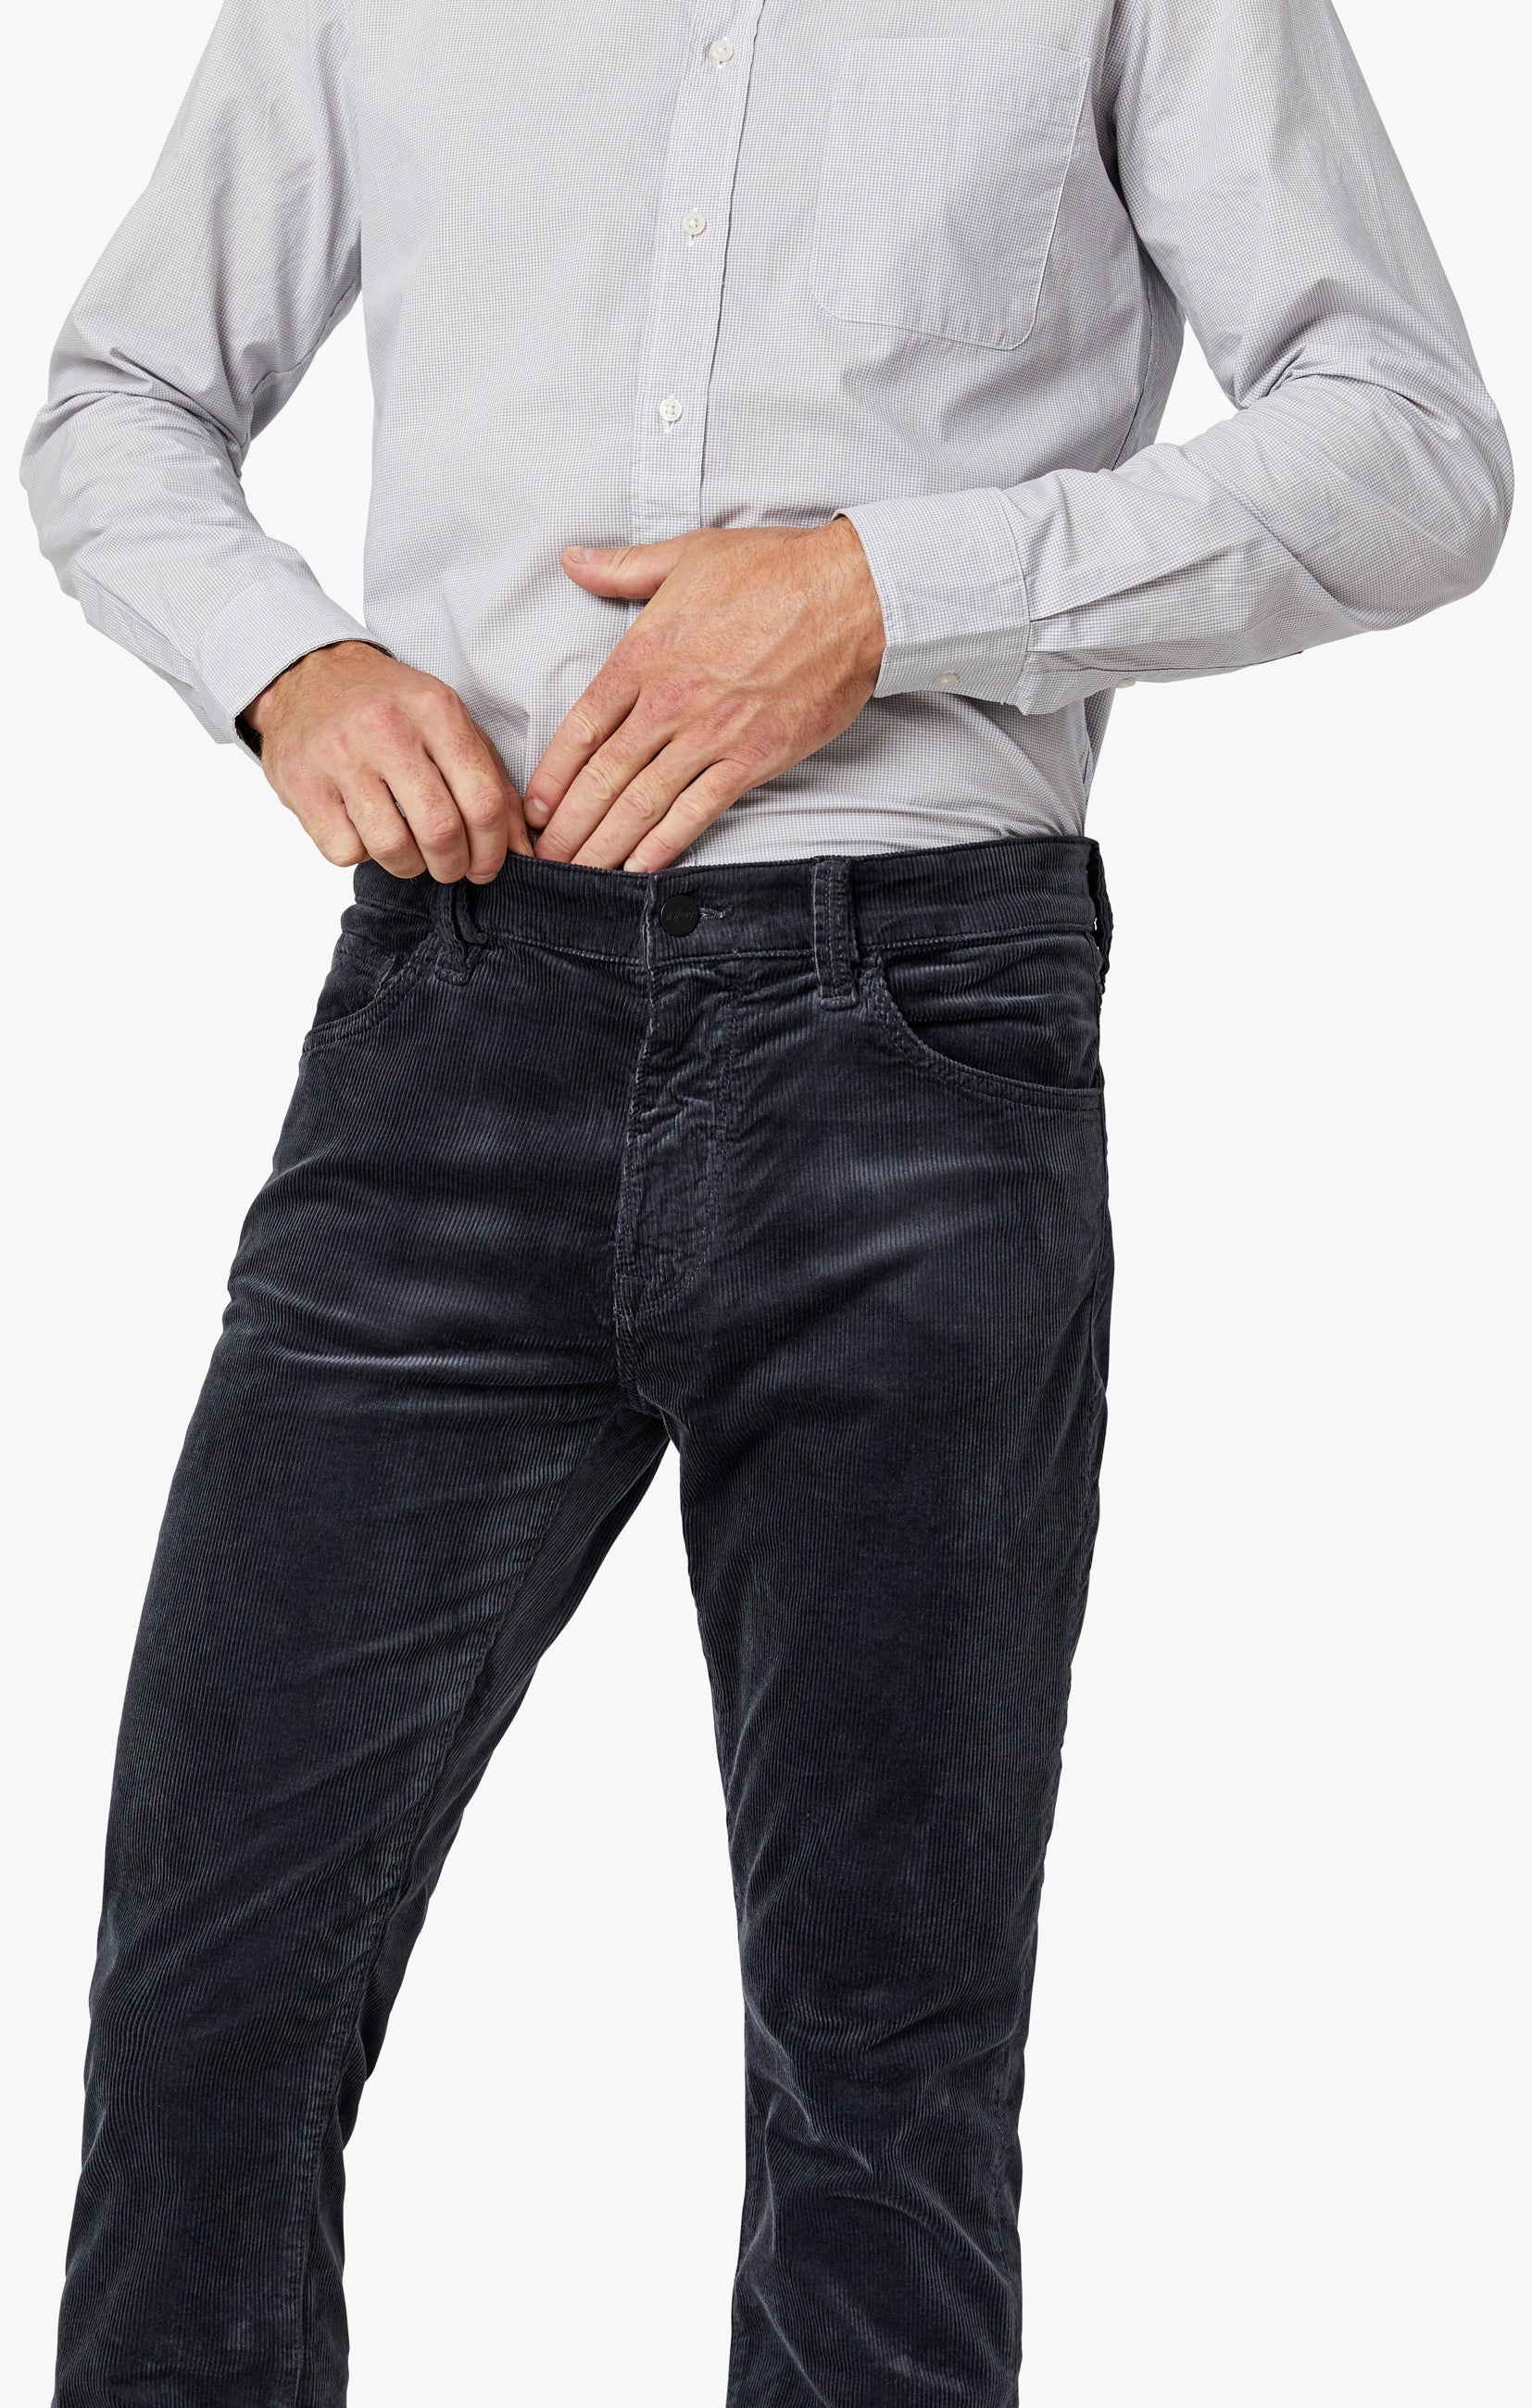 Charisma Relaxed Straight Pants in Iron Cord